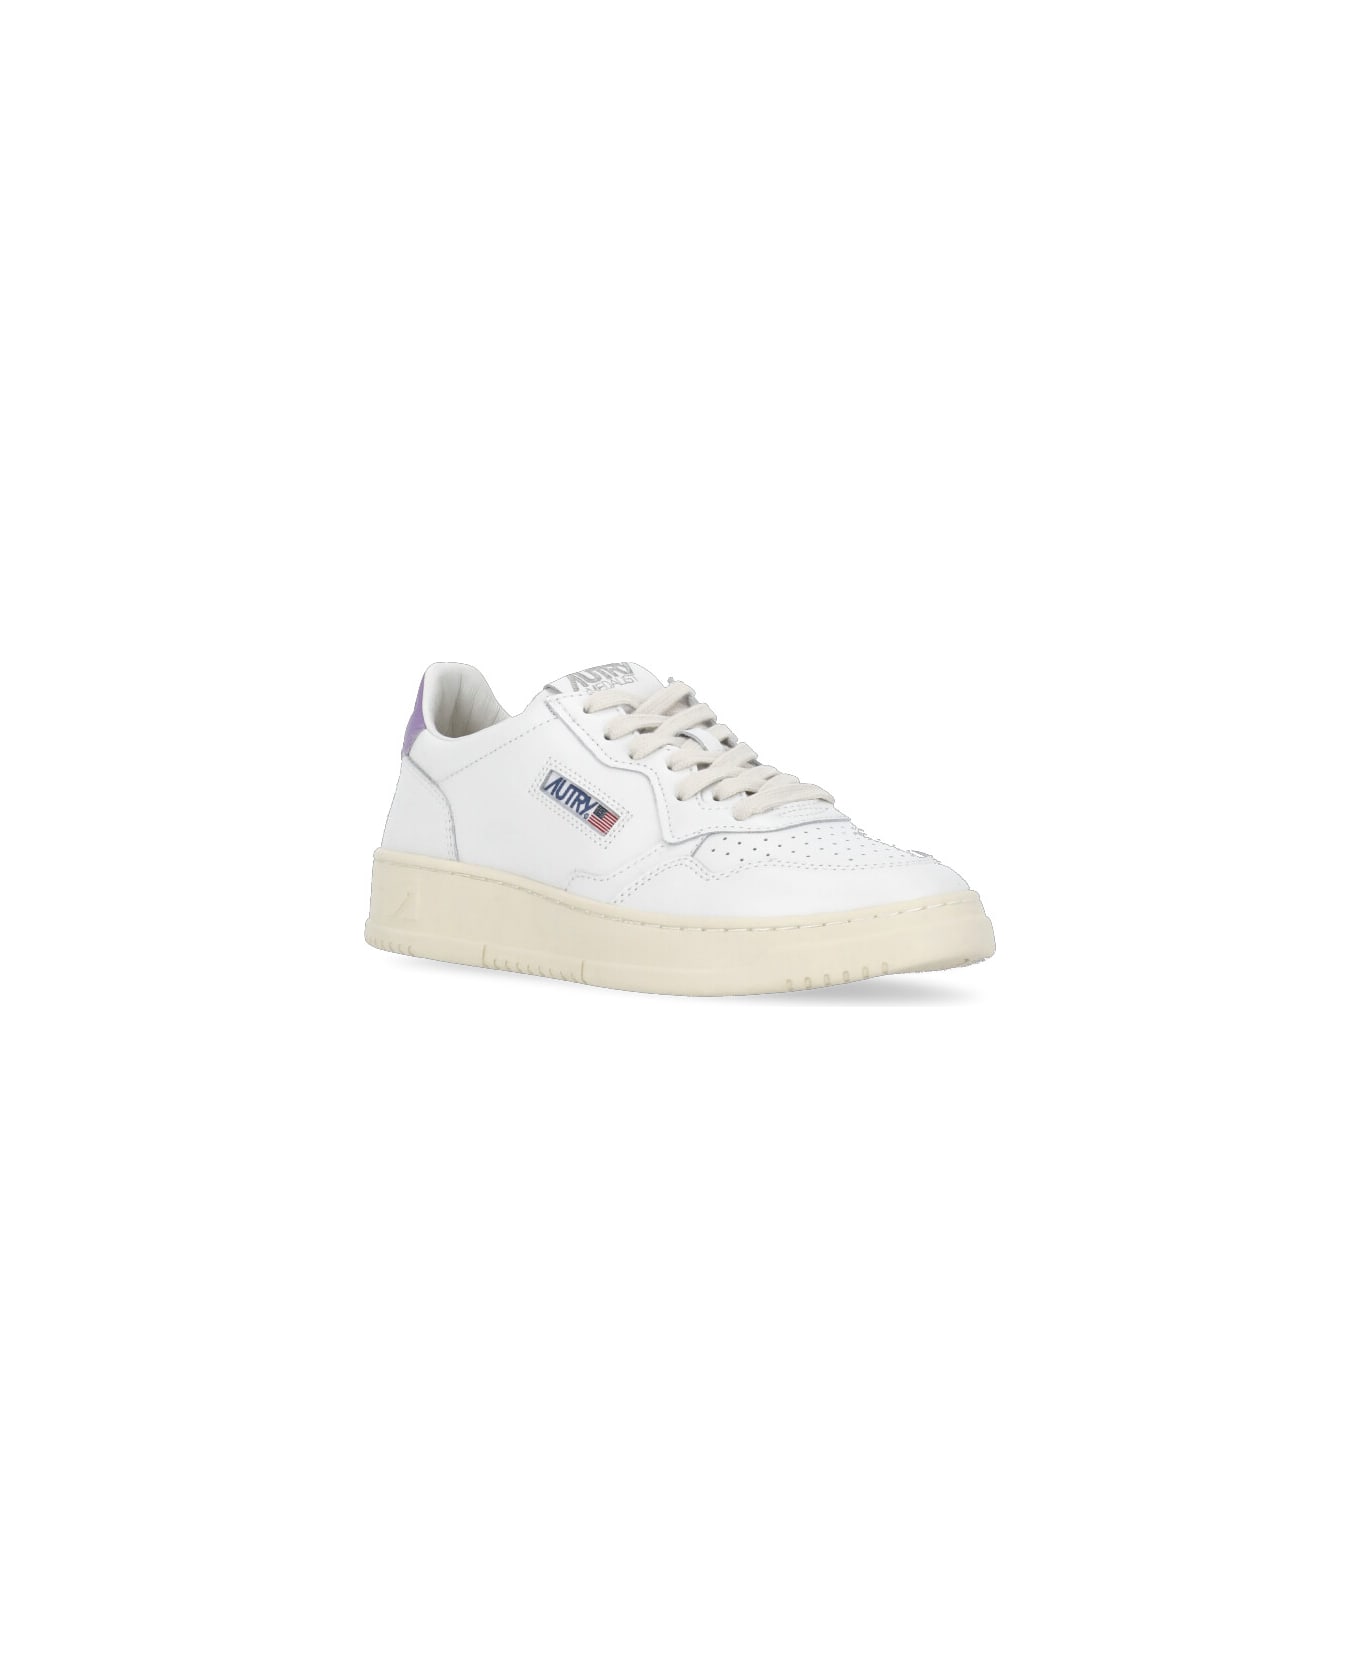 Autry Sneakers Medalist Low - Wht/engl lav スニーカー